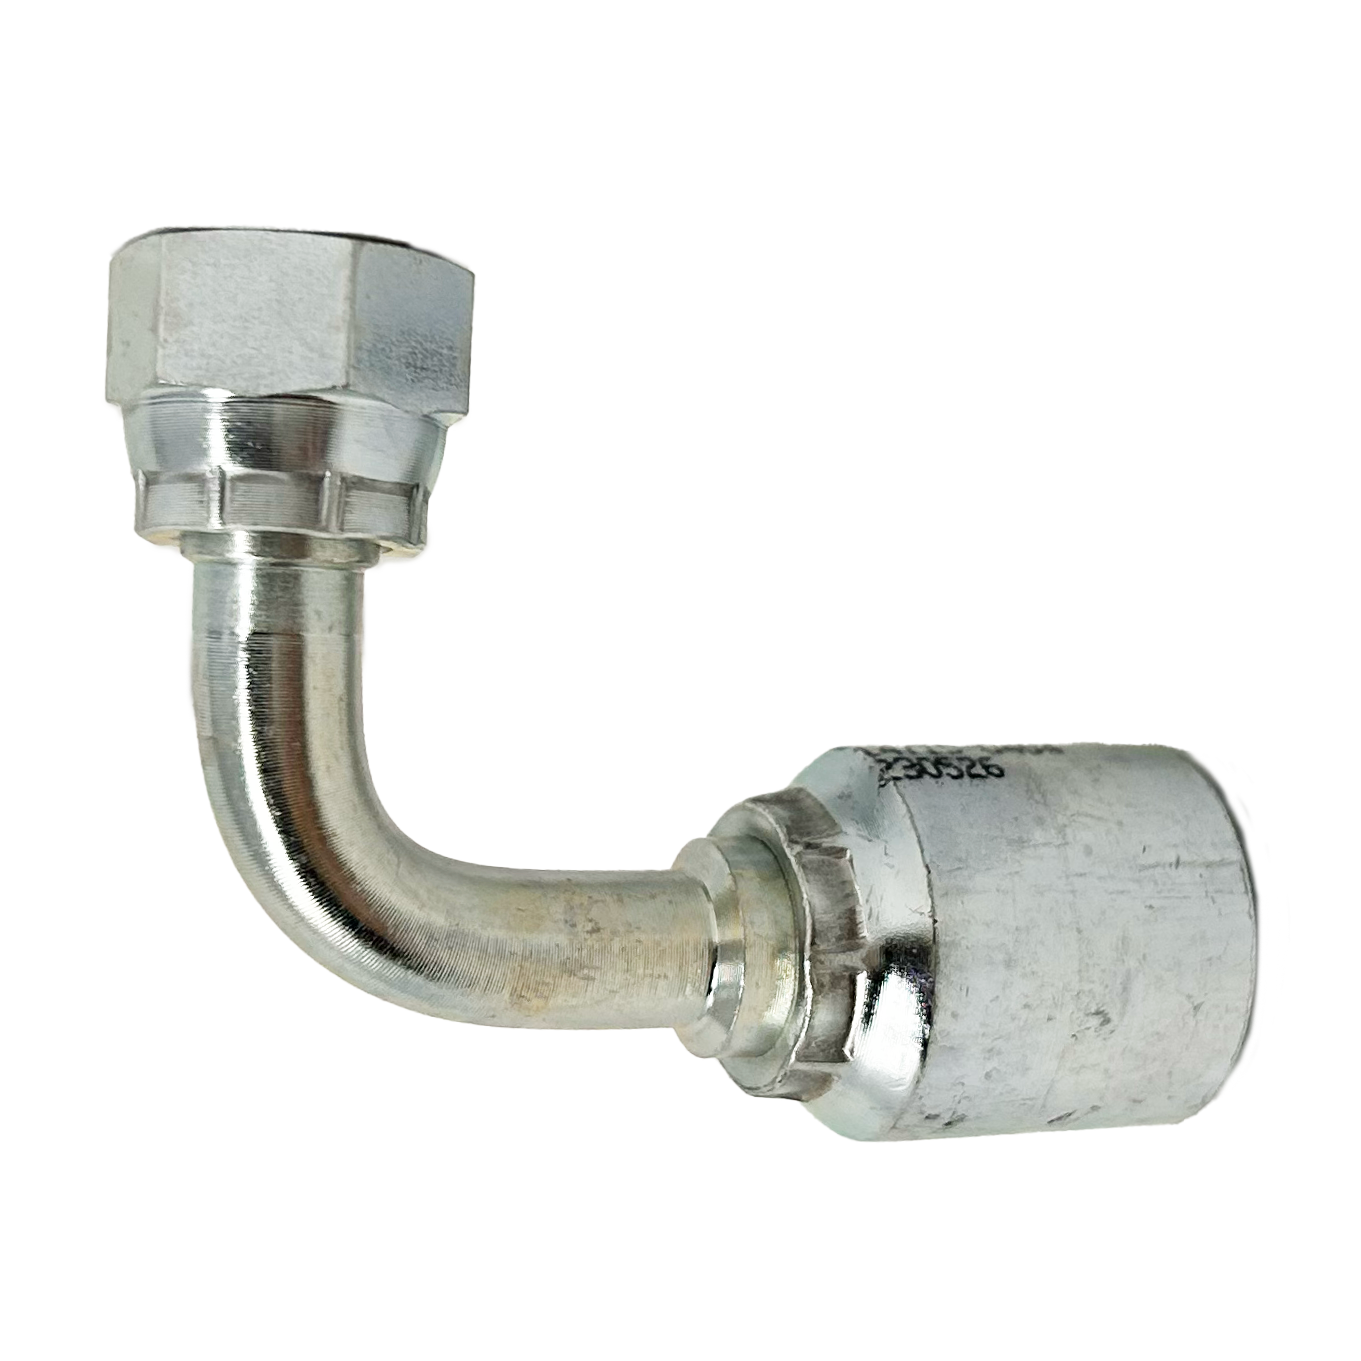 B2-OFFX90-0404: Continental Hose Fitting, 0.25 (1/4") Hose ID x 9/16-18 Female ORFS, 90-Degree Swivel Connection